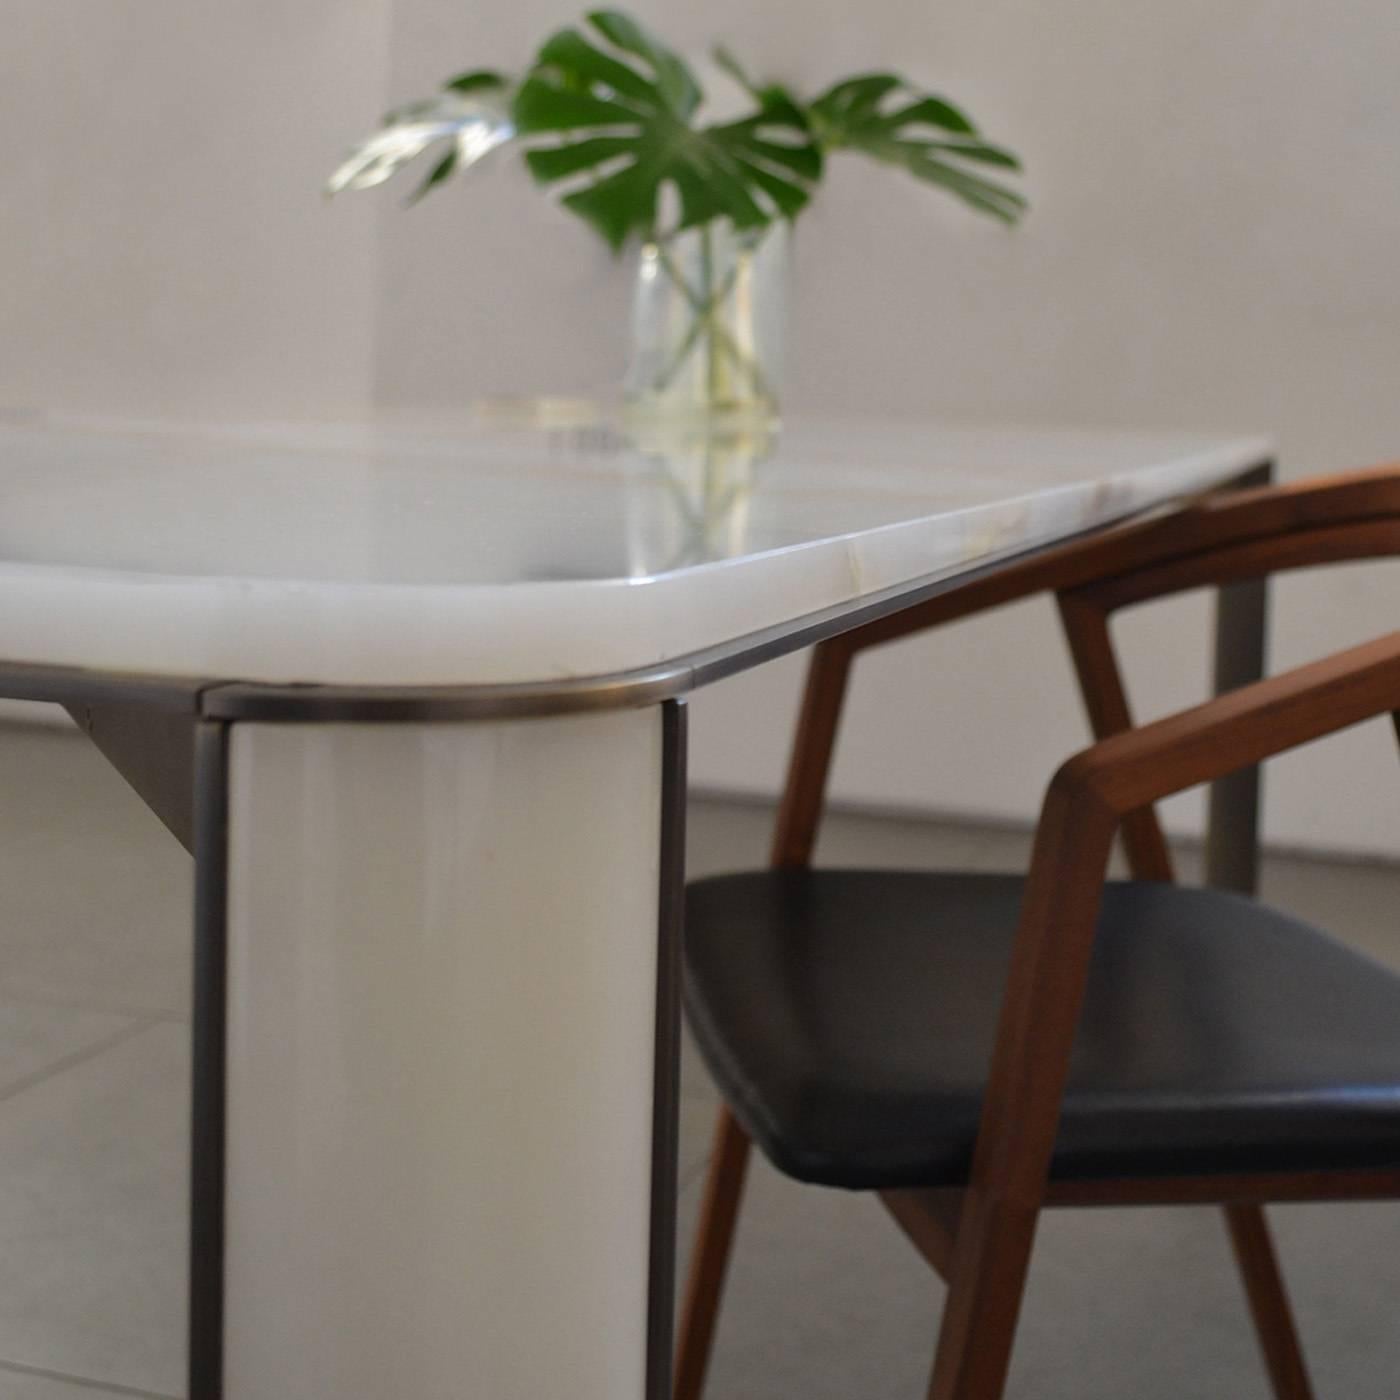 This dining table, designed by Monica Geronimi, features a timeless design that combines modern lines, curved angles, and Classic materials. The structure in steel supports a top and mounted legs in onyx. A splendid table that can be used in the